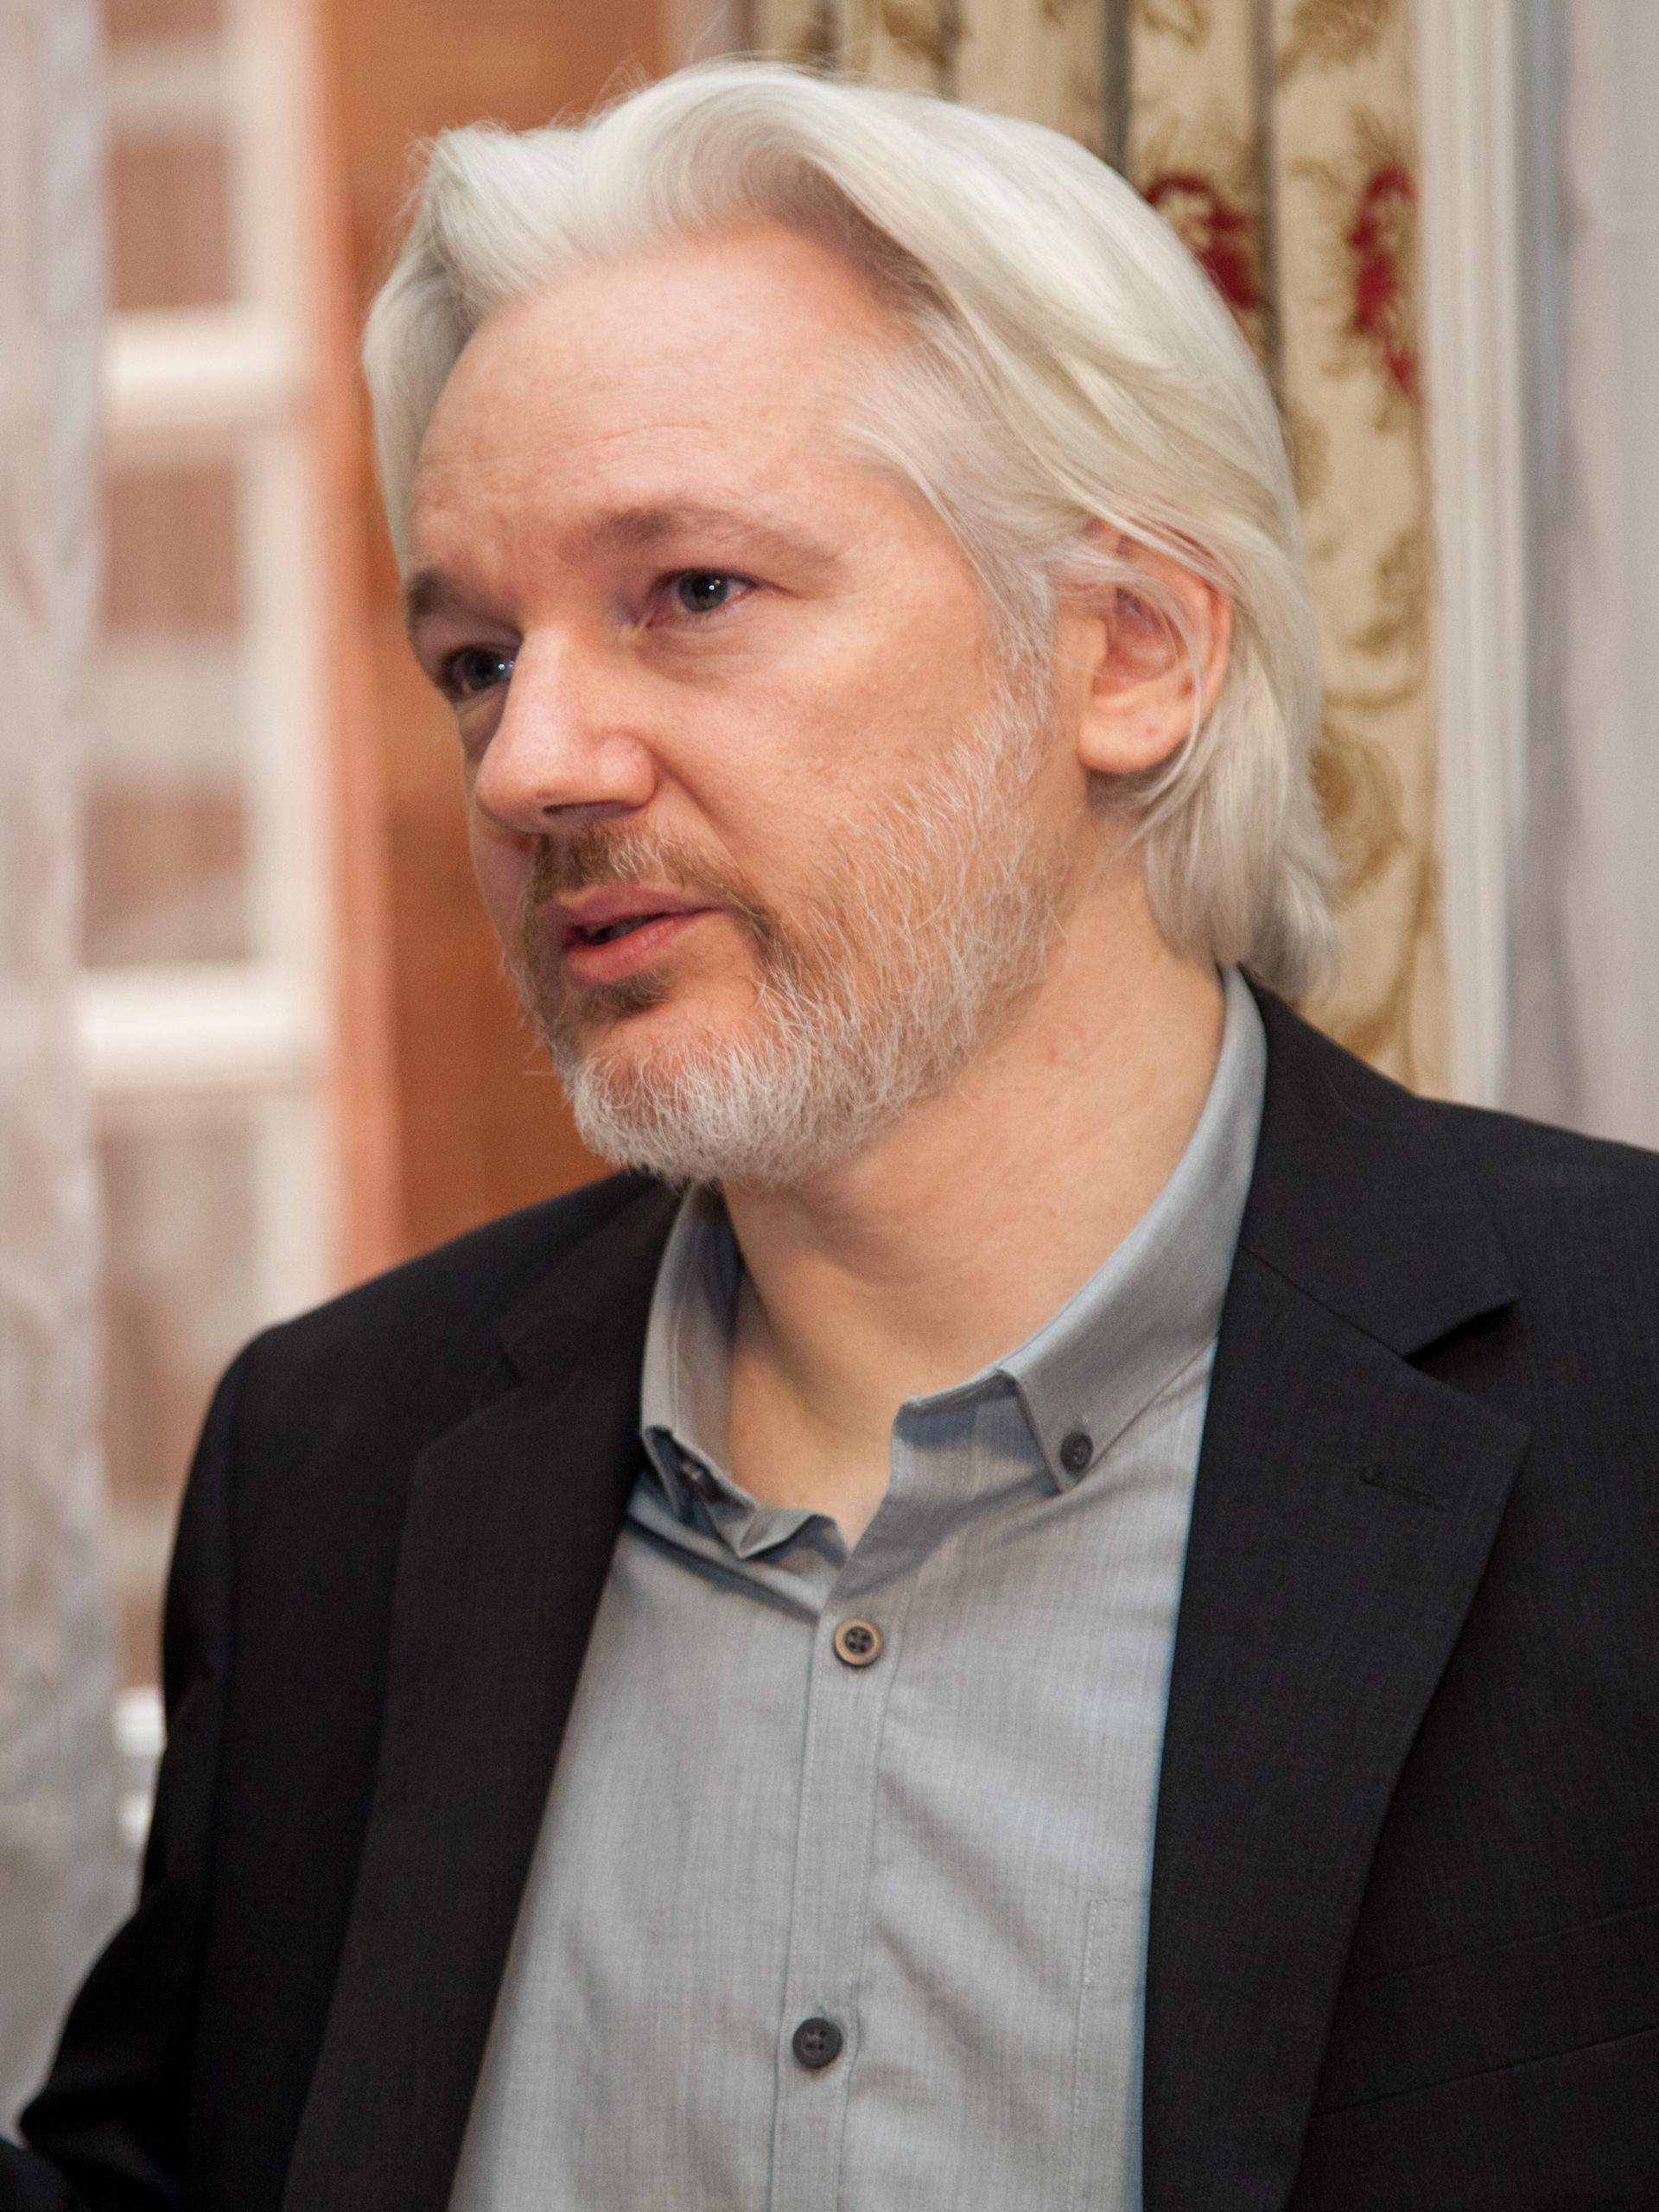 Why Julian Assange should be released from prison in 2023